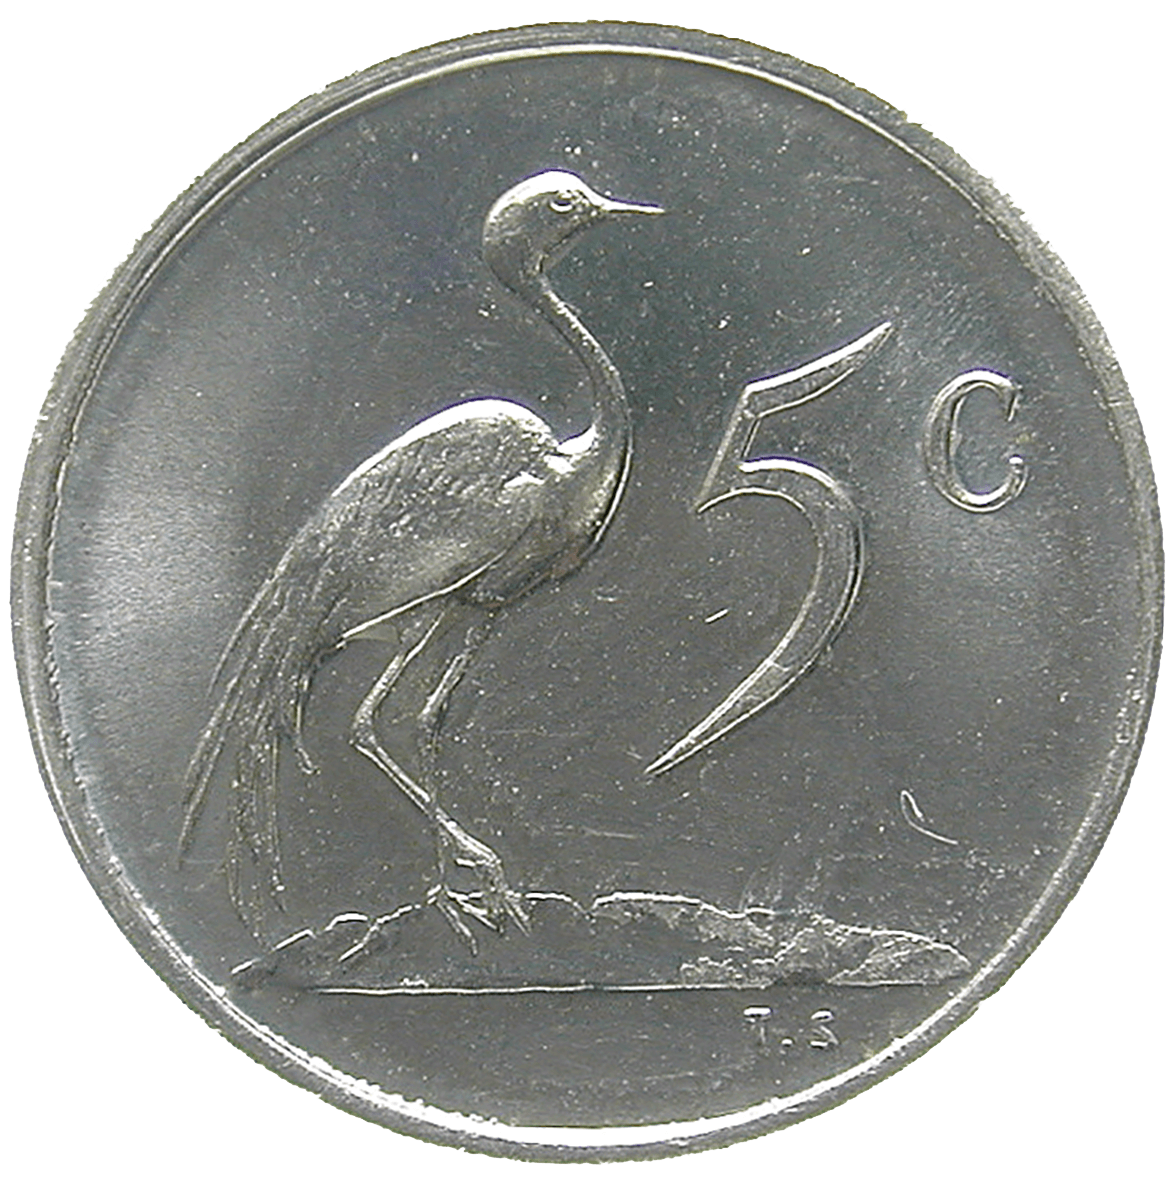 Republic of South Africa, 5 Cents 1980 (reverse)